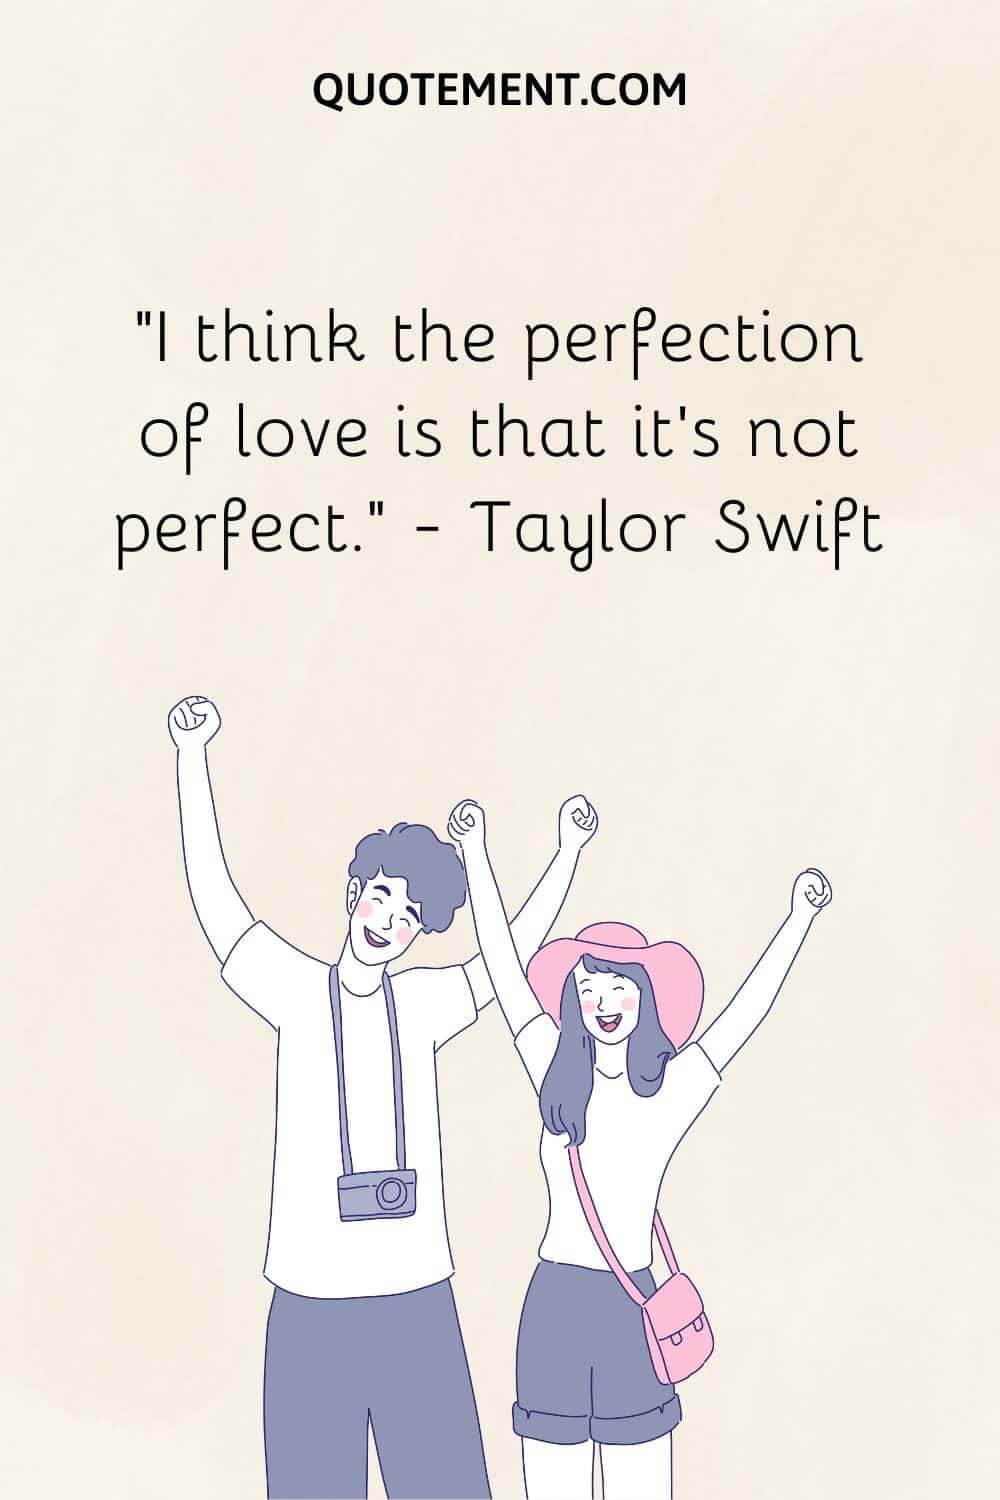 I think the perfection of love is that it’s not perfect